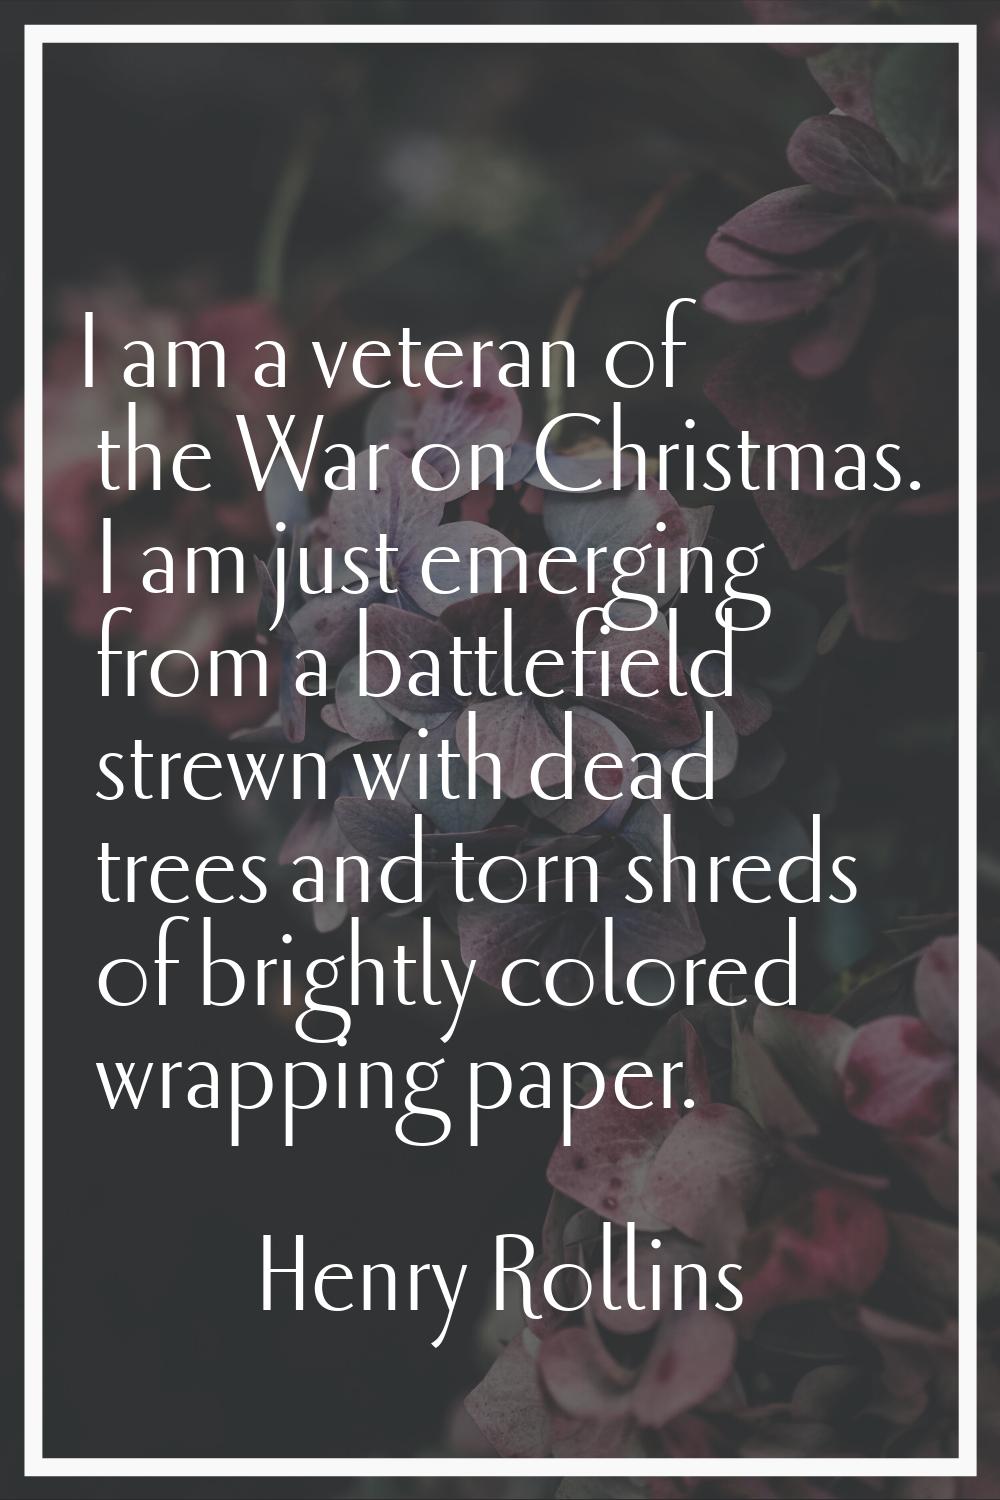 I am a veteran of the War on Christmas. I am just emerging from a battlefield strewn with dead tree